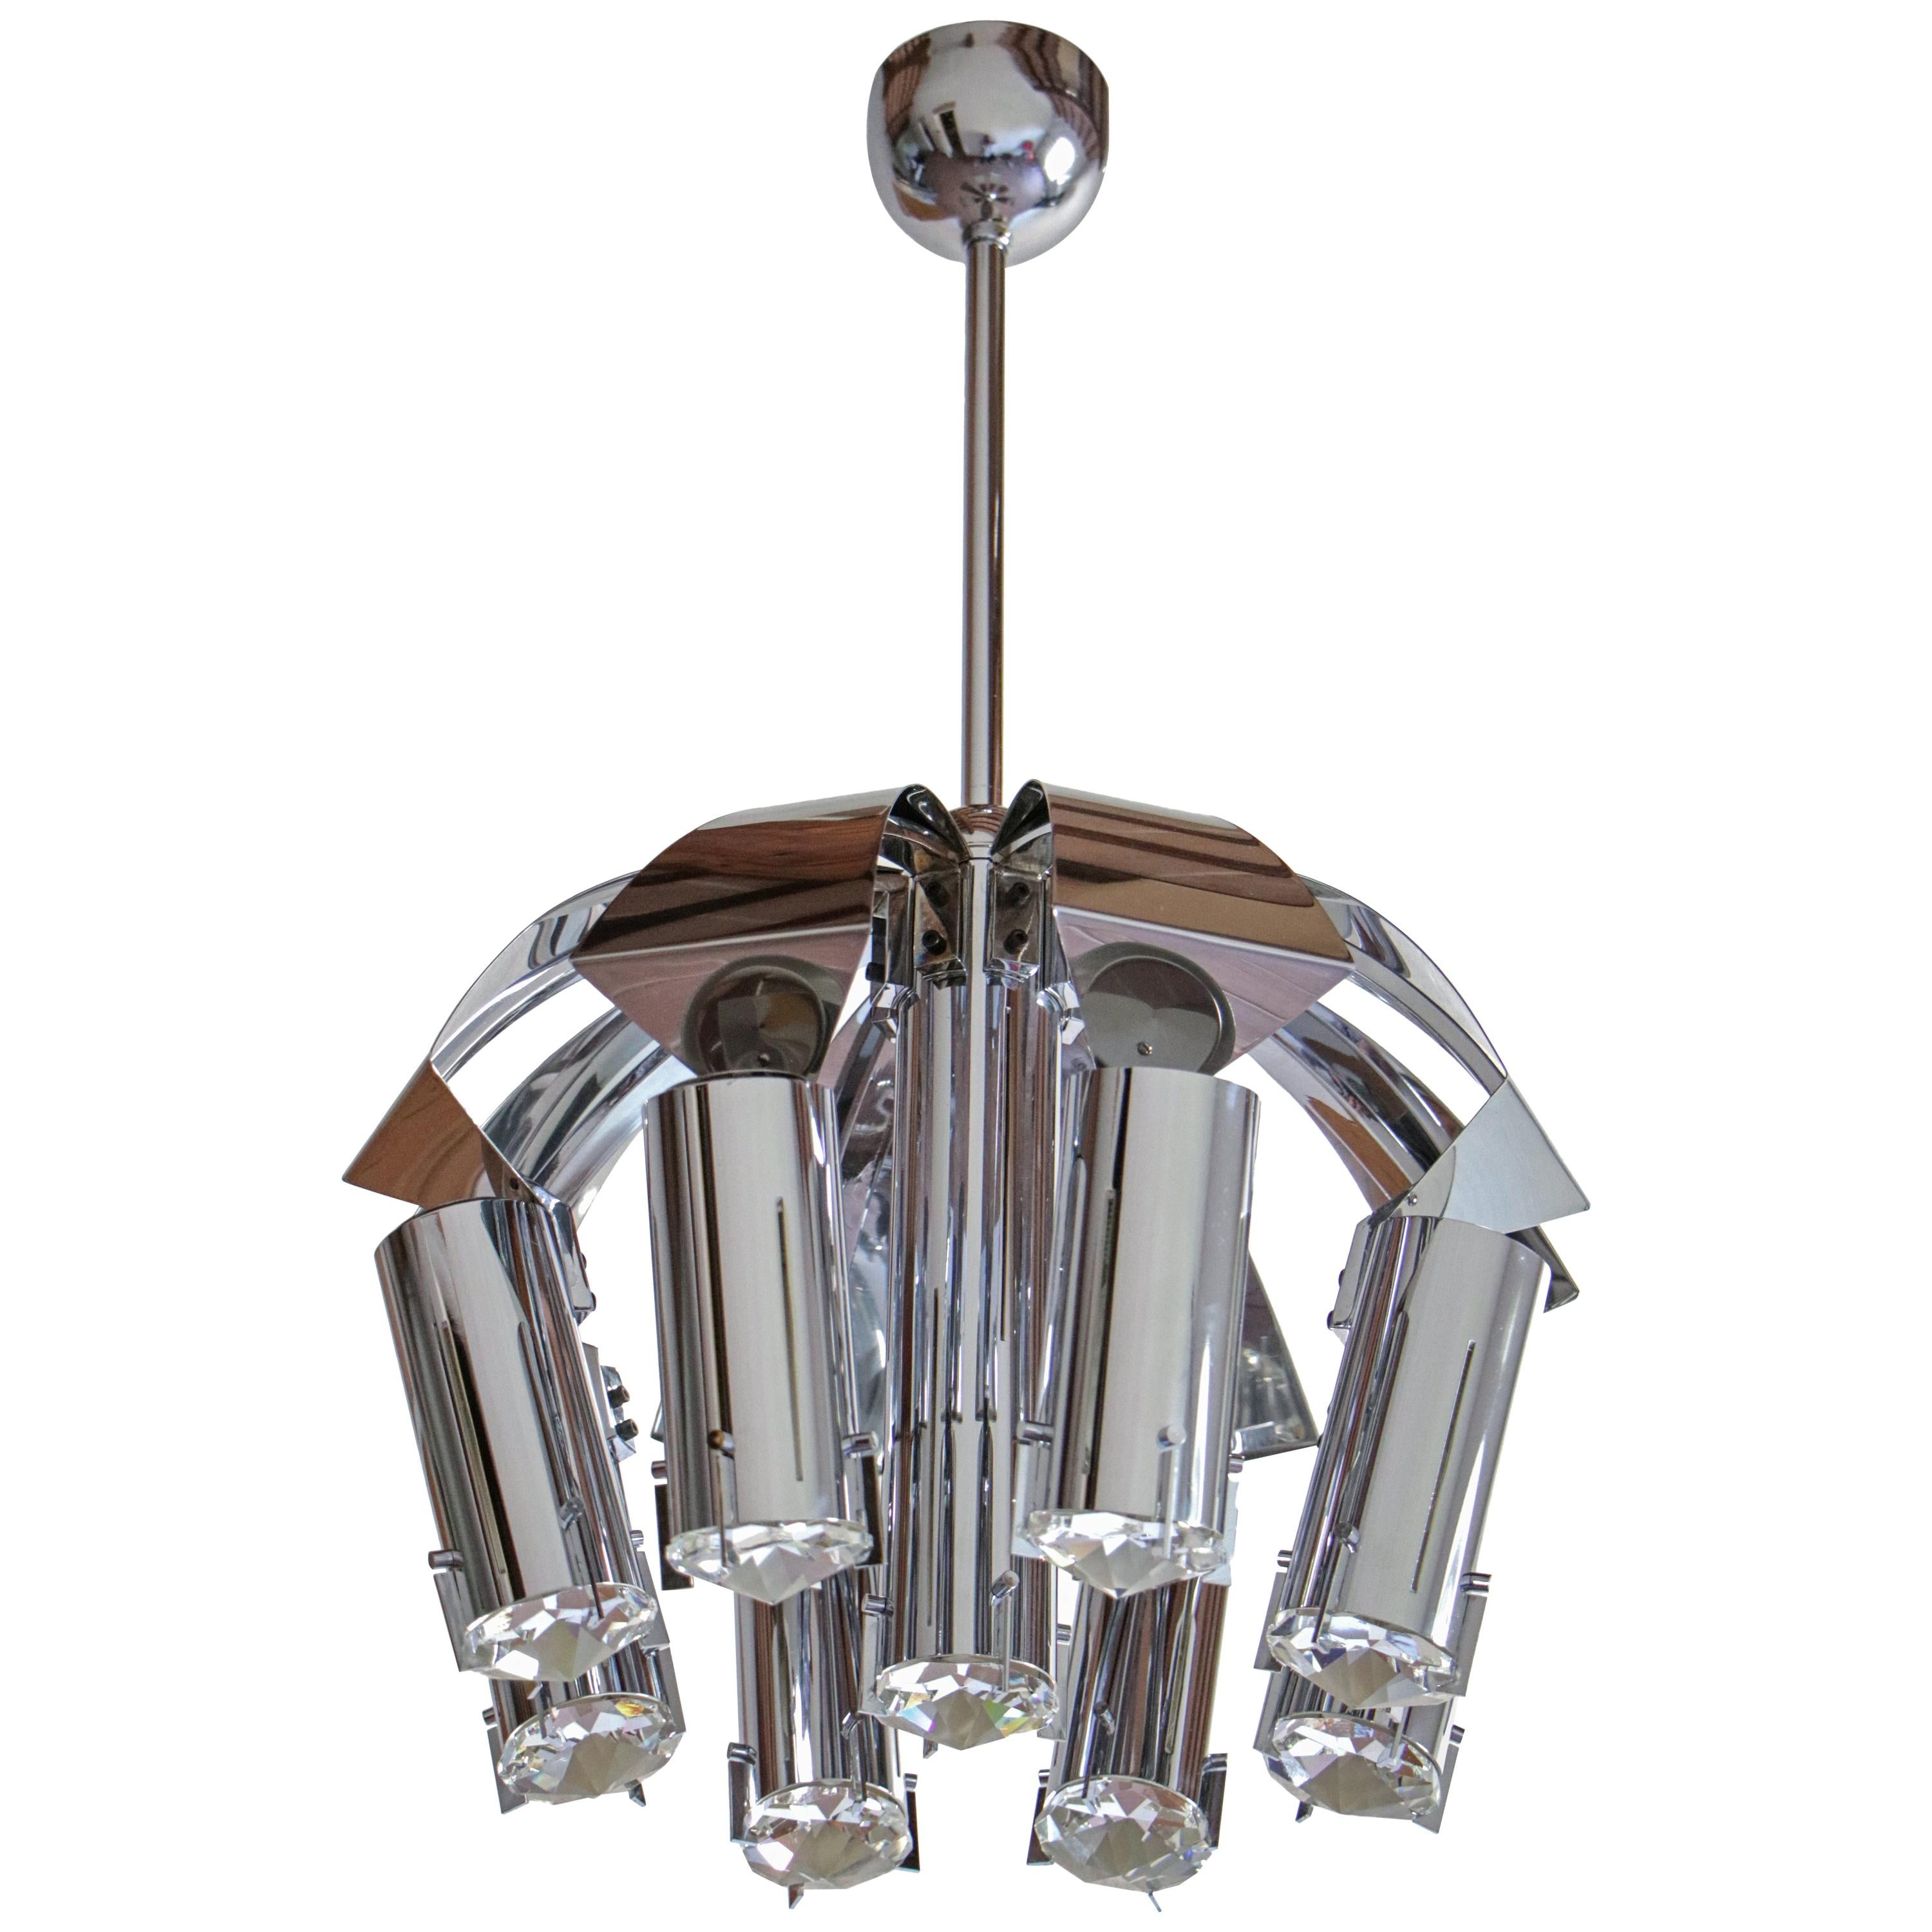 Wonderful chromed chandelier pendant ceiling lamp attributed to Goffredo Reggiani from the '70s. Structure made of chromed brass and crystal. Nine functional lights, E14 format. Unique design and prestigious executive quality are the characteristics